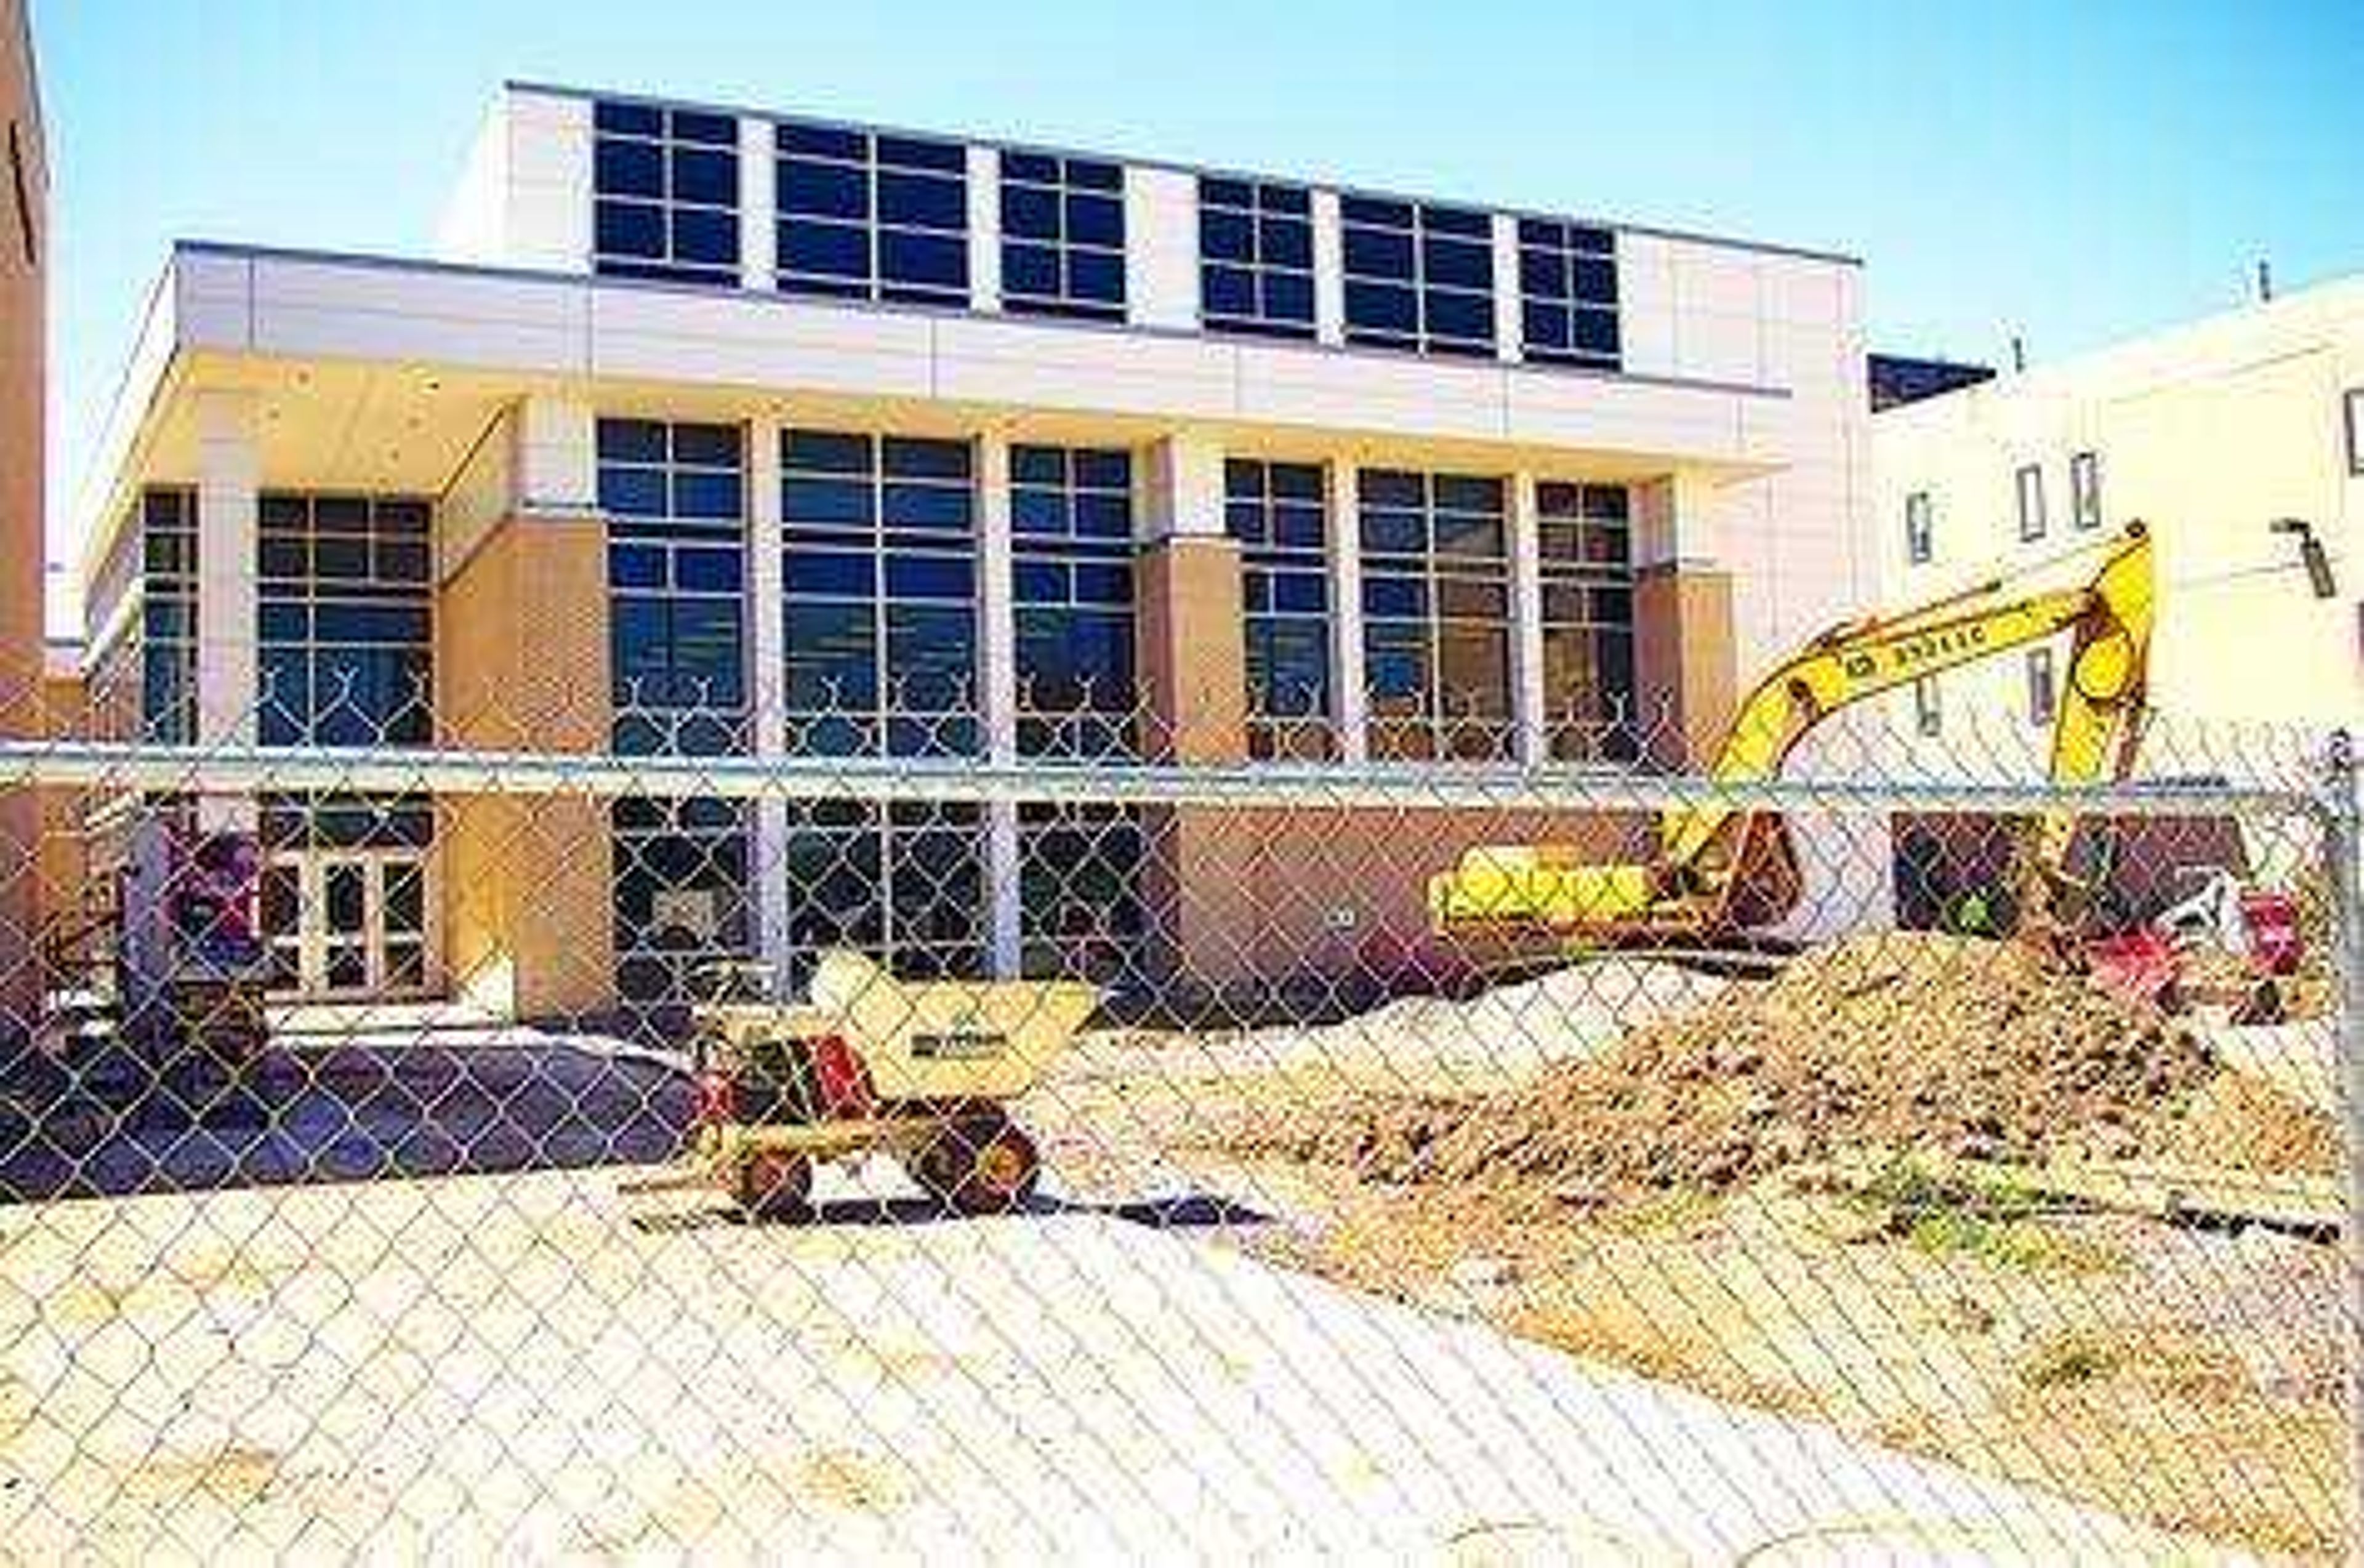 Work continued on Magill Hall throughout the summer. -Photo by Nathan Hamilton